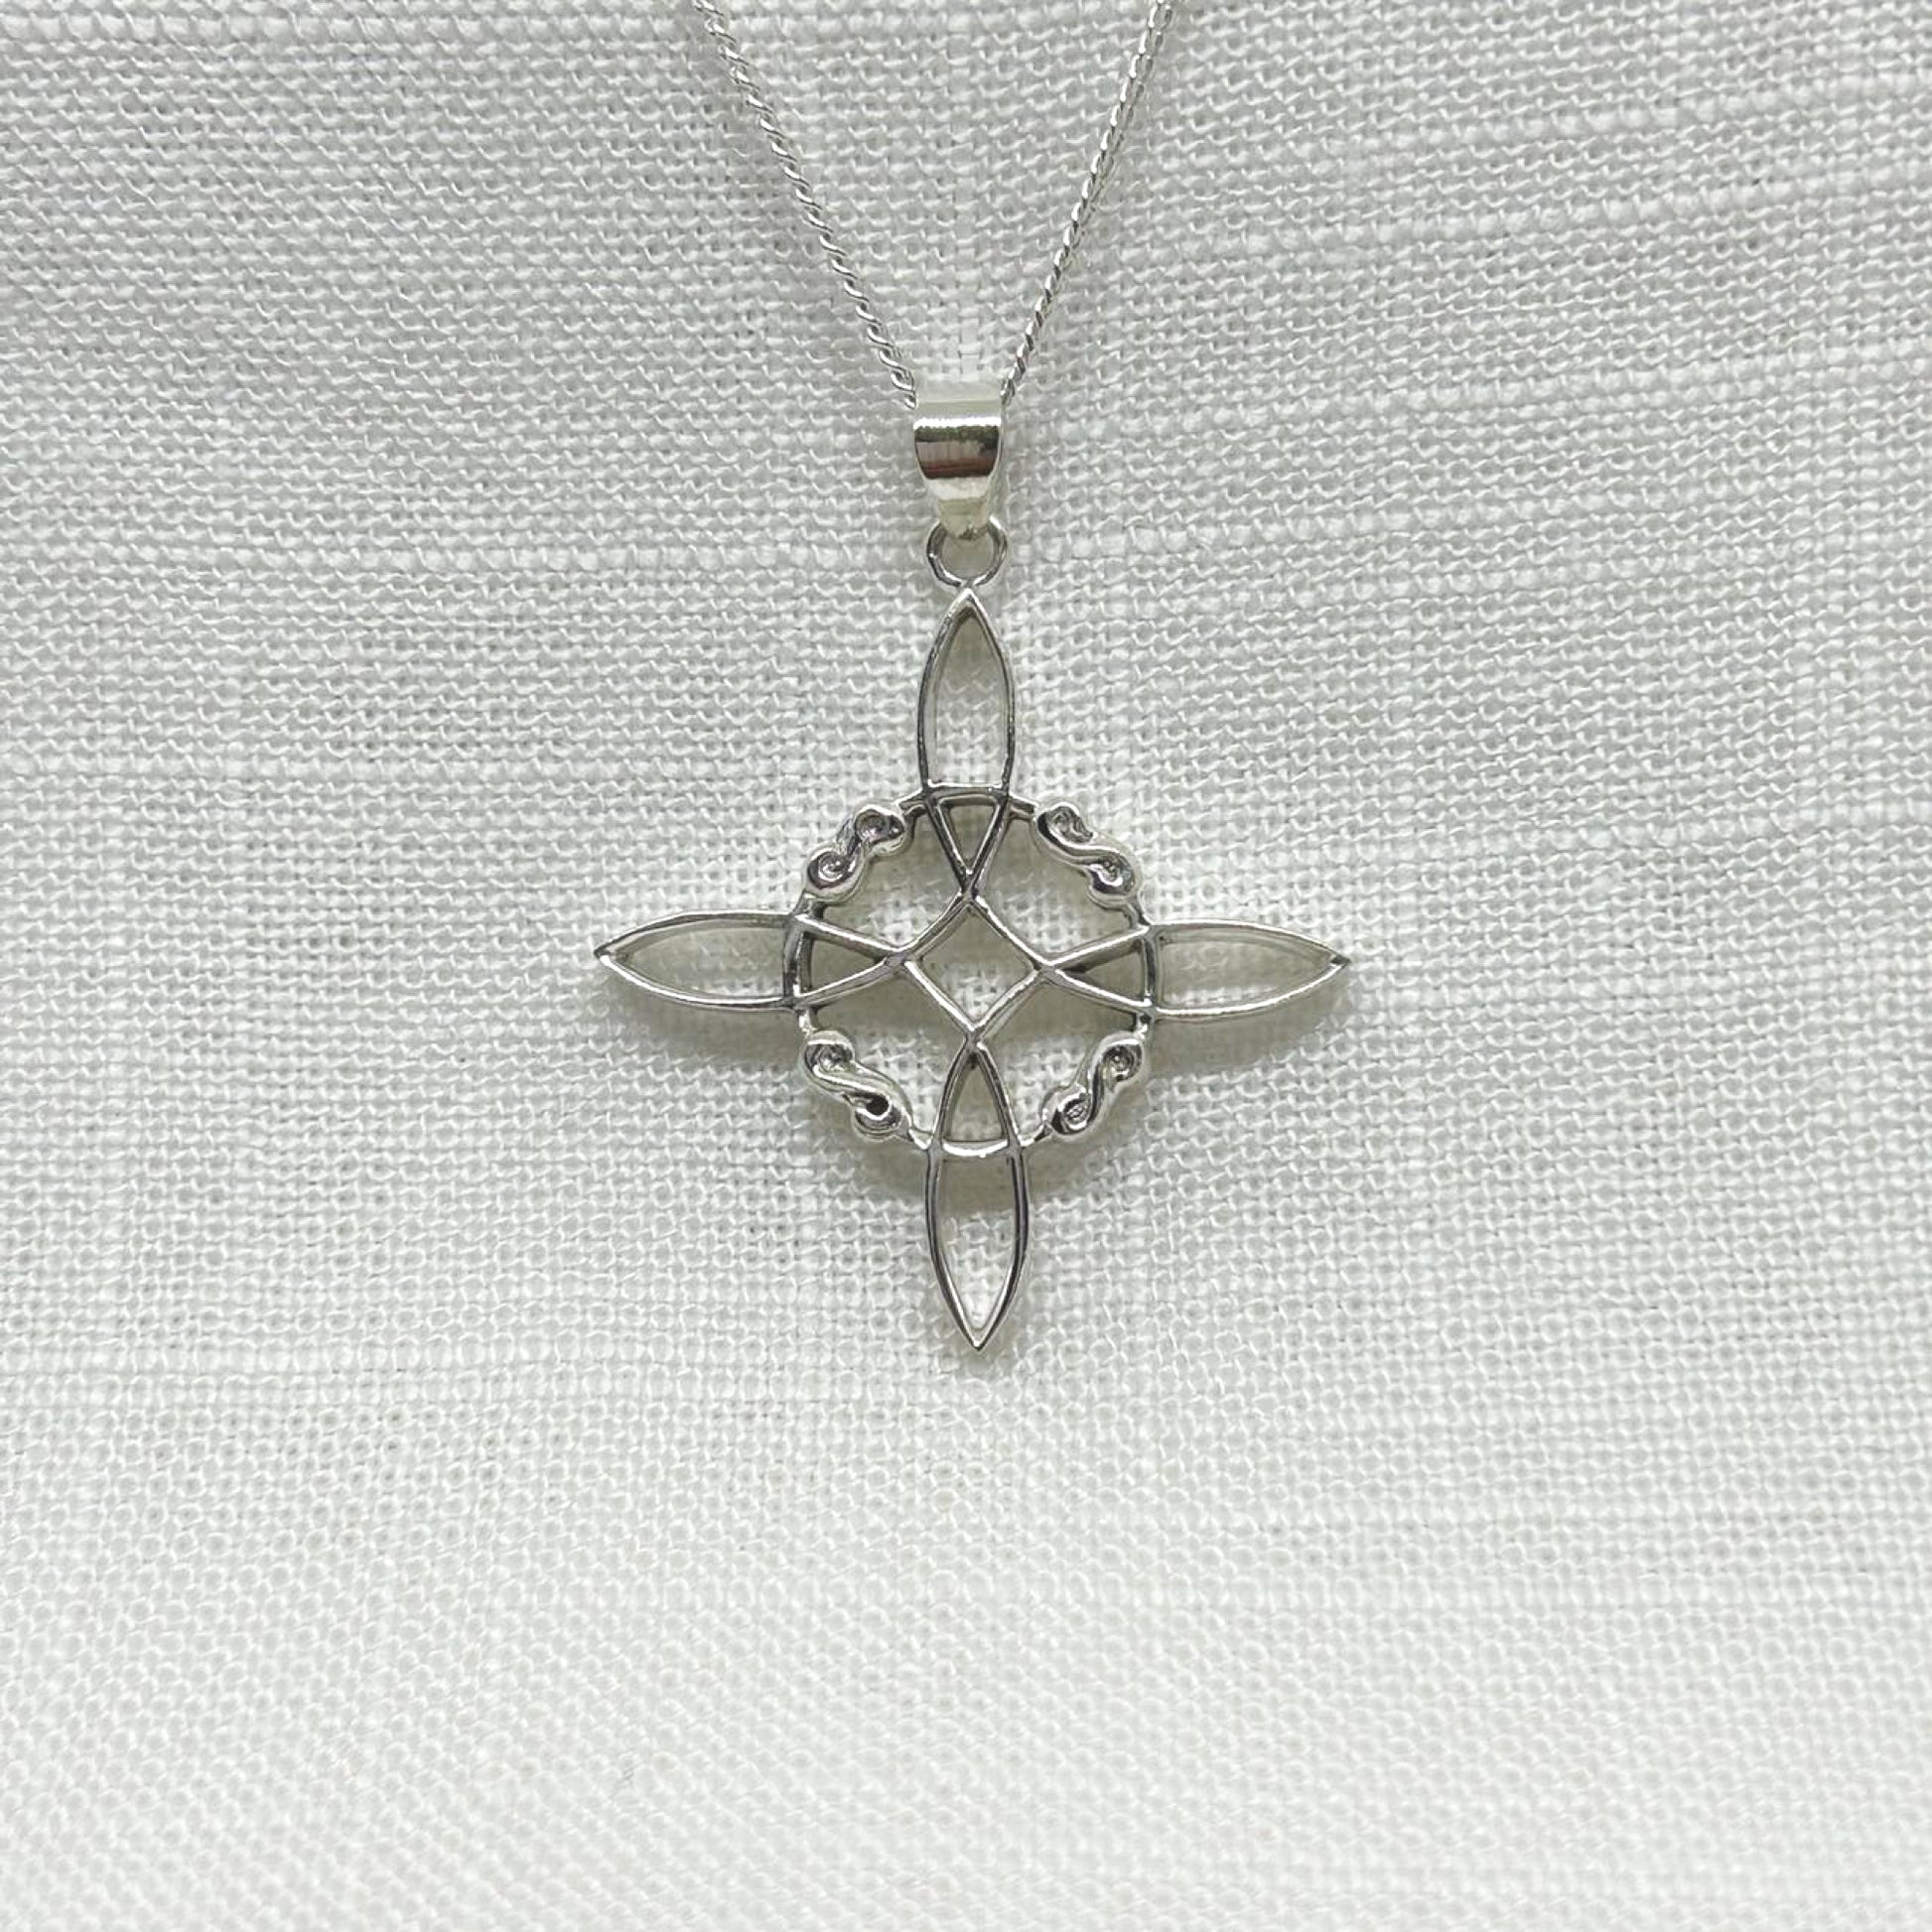 The pendant is stamped .925 on the back and measures 40mm long inc bale x 33mm wide x a good sized 3mm thick depth. All pendants come supplied on a 20" Sterling Silver Curb Chain. A great protection symbol for those wanting an alt to pentagrams